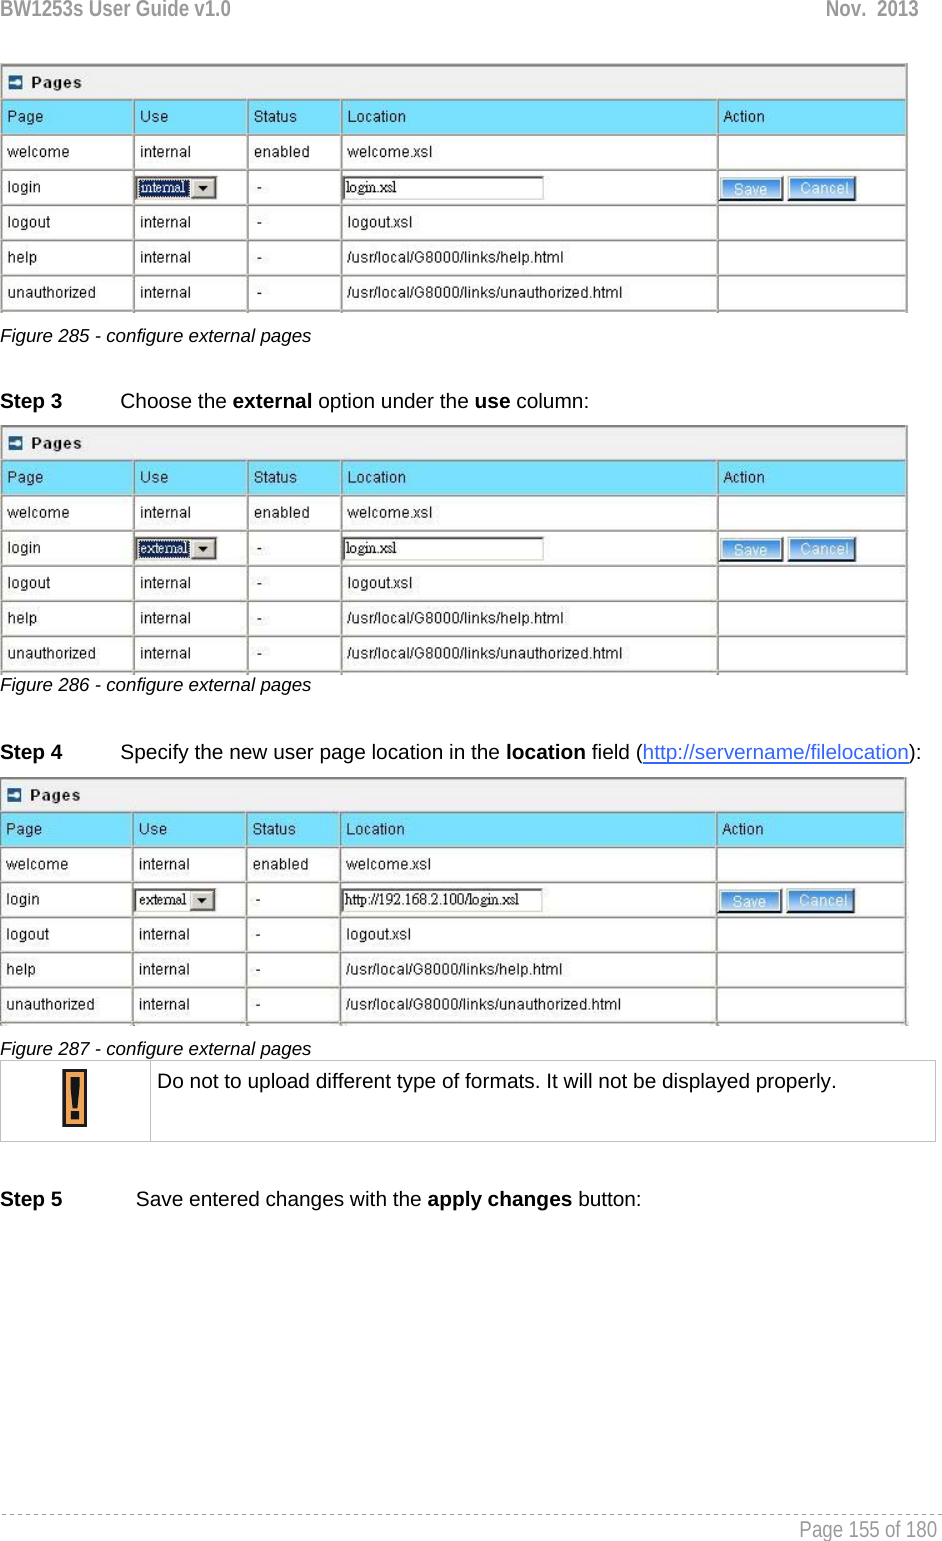 BW1253s User Guide v1.0  Nov.  2013     Page 155 of 180    Figure 285 - configure external pages  Step 3          Choose the external option under the use column:  Figure 286 - configure external pages  Step 4          Specify the new user page location in the location field (http://servername/filelocation):   Figure 287 - configure external pages  Do not to upload different type of formats. It will not be displayed properly.  Step 5  Save entered changes with the apply changes button: 